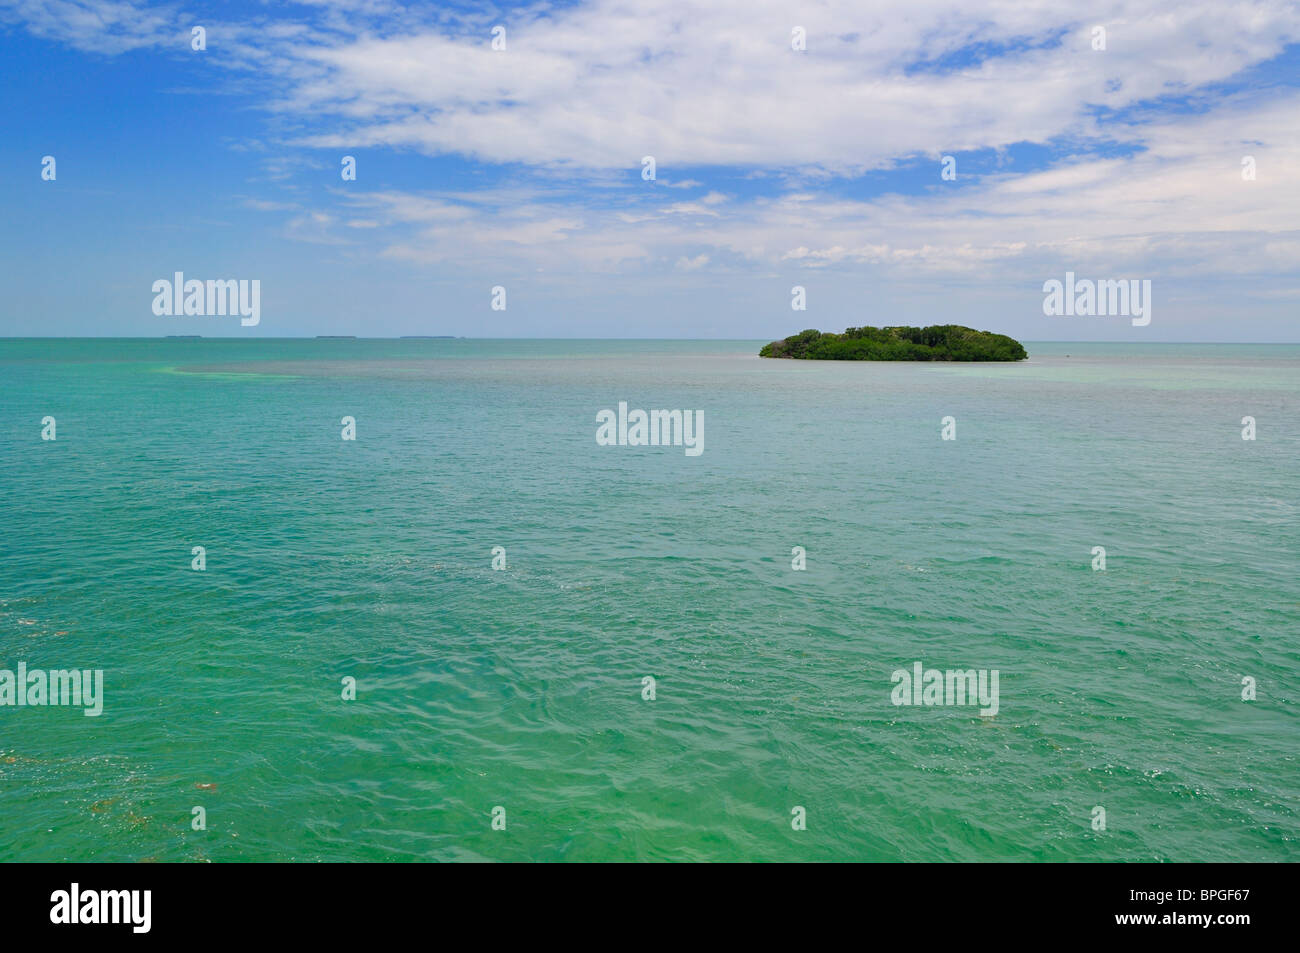 Aqua, colored waters of Florida Bay with solitary island north of the Florida Keys. Stock Photo